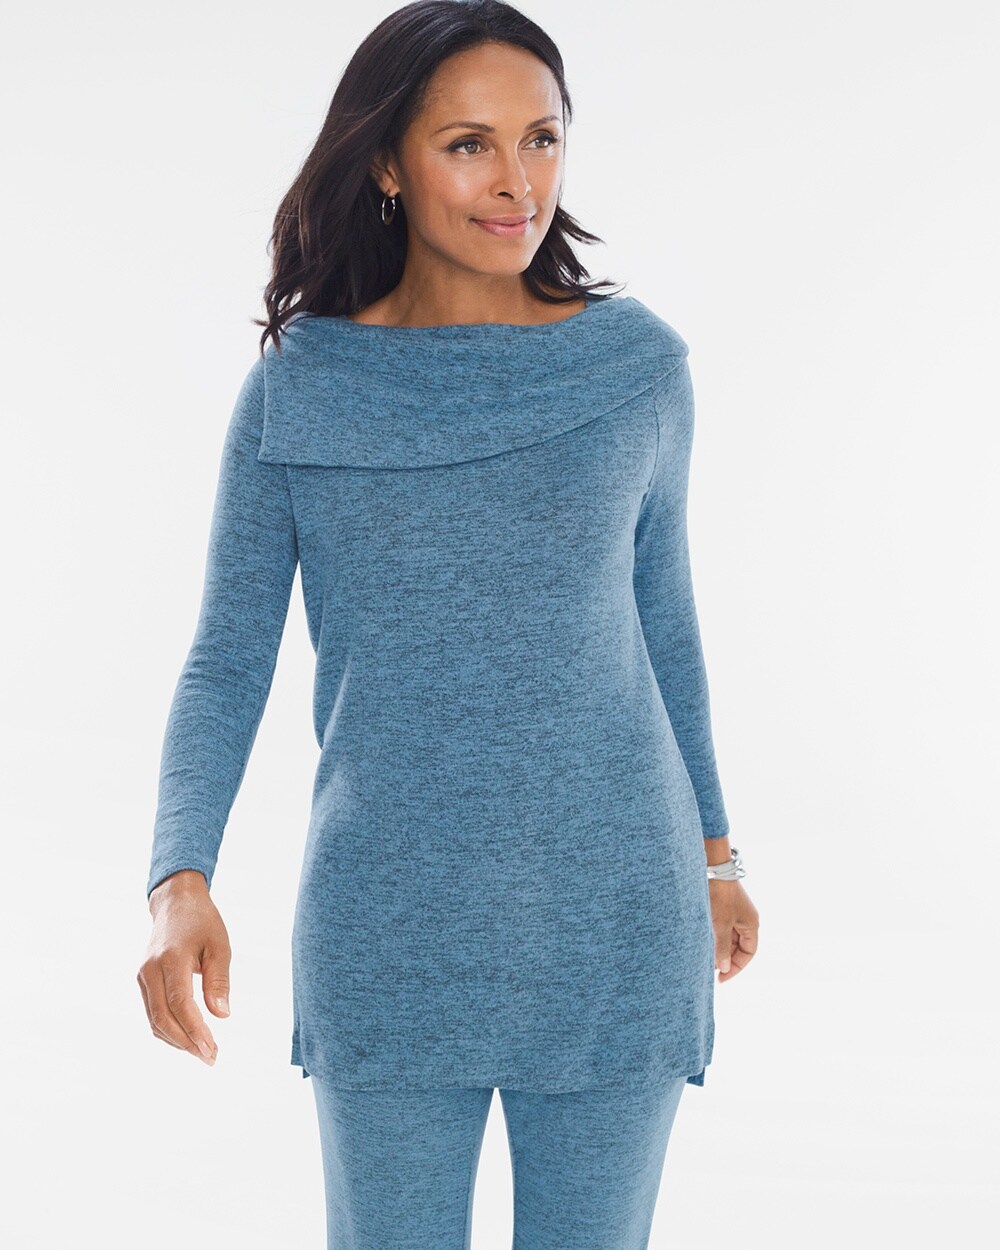 Zenergy Knit Collection Cozy Pullover